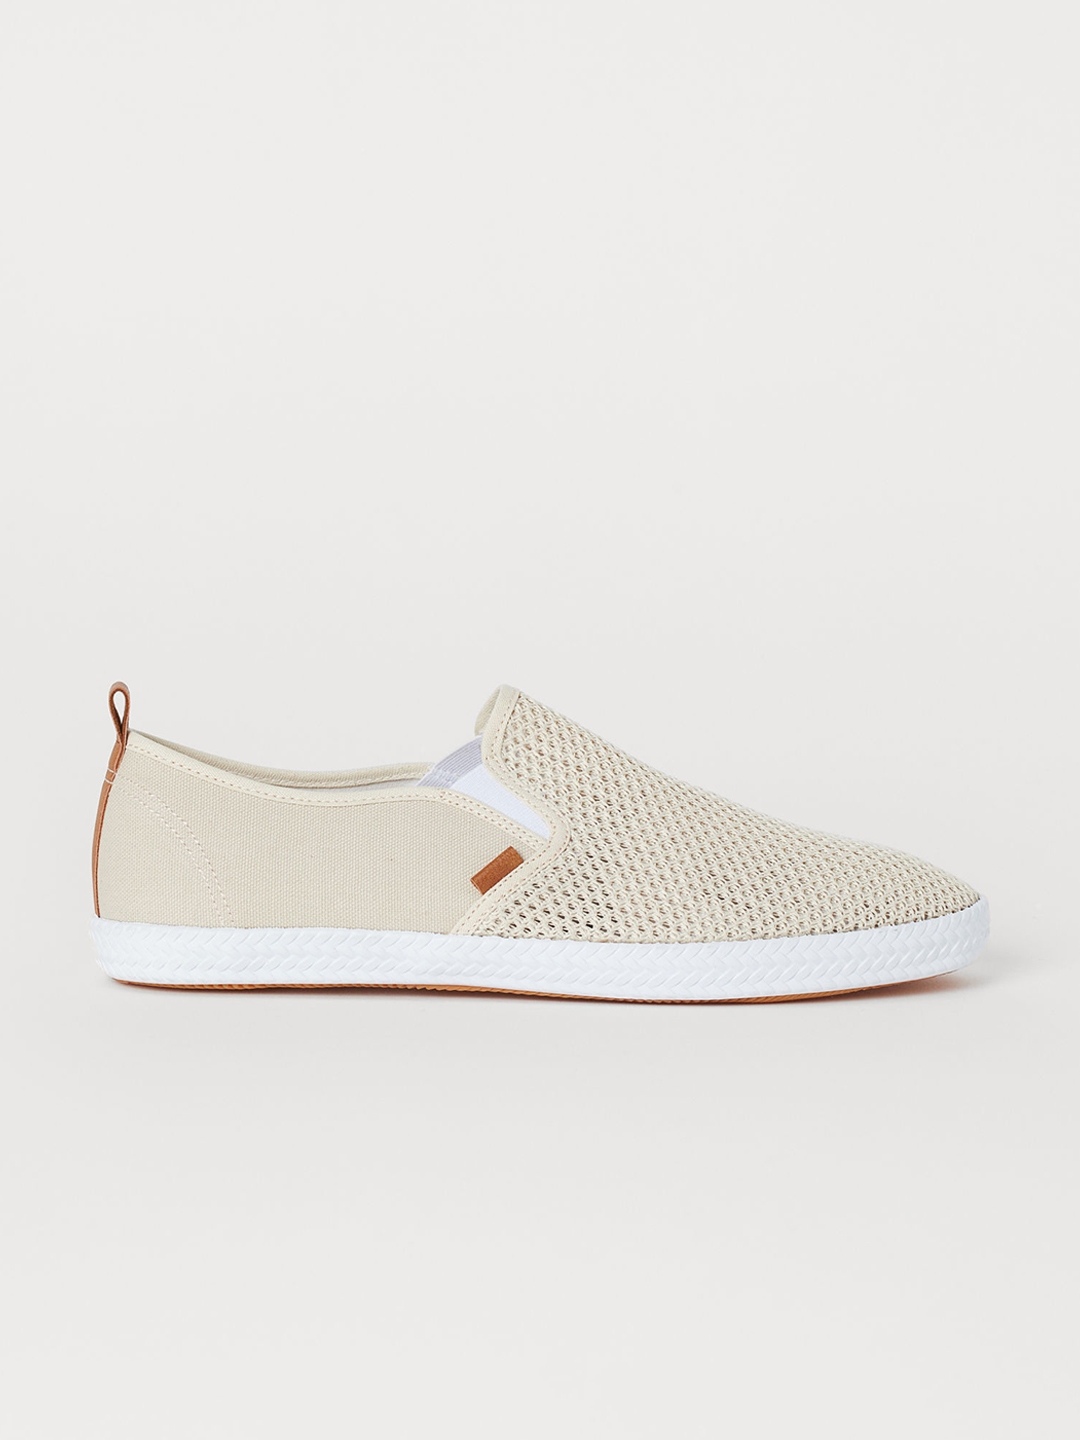 h&m slip on trainers